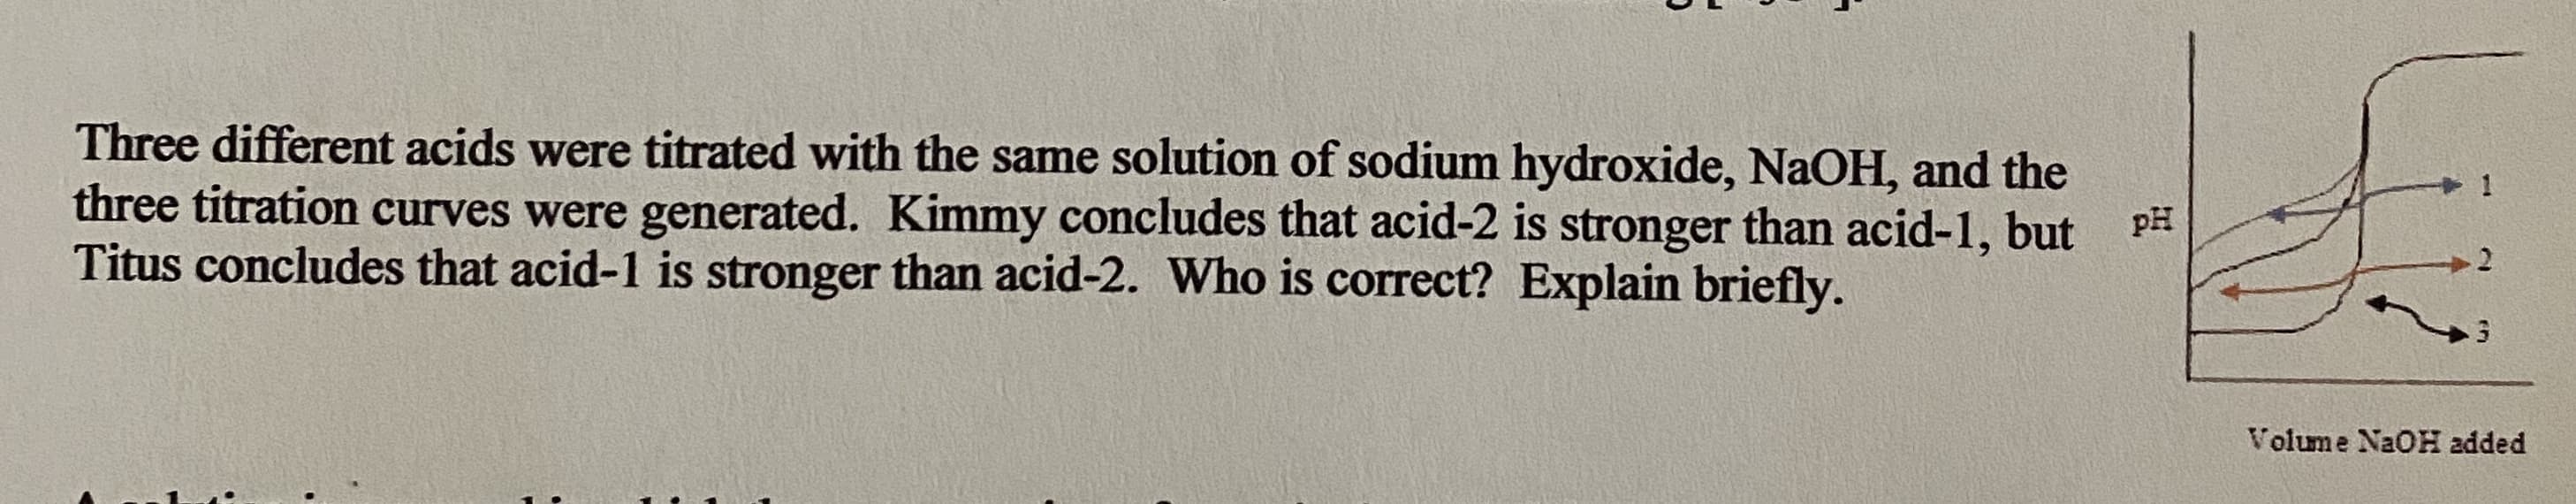 Three different acids were titrated with the same solution of sodium hydroxide, NaOH, and the
three titration curves were generated. Kimmy concludes that acid-2 is stronger than acid-1, but
Titus concludes that acid-1 is stronger than acid-2. Who is correct? Explain briefly.
pH
Volume NaOH added
